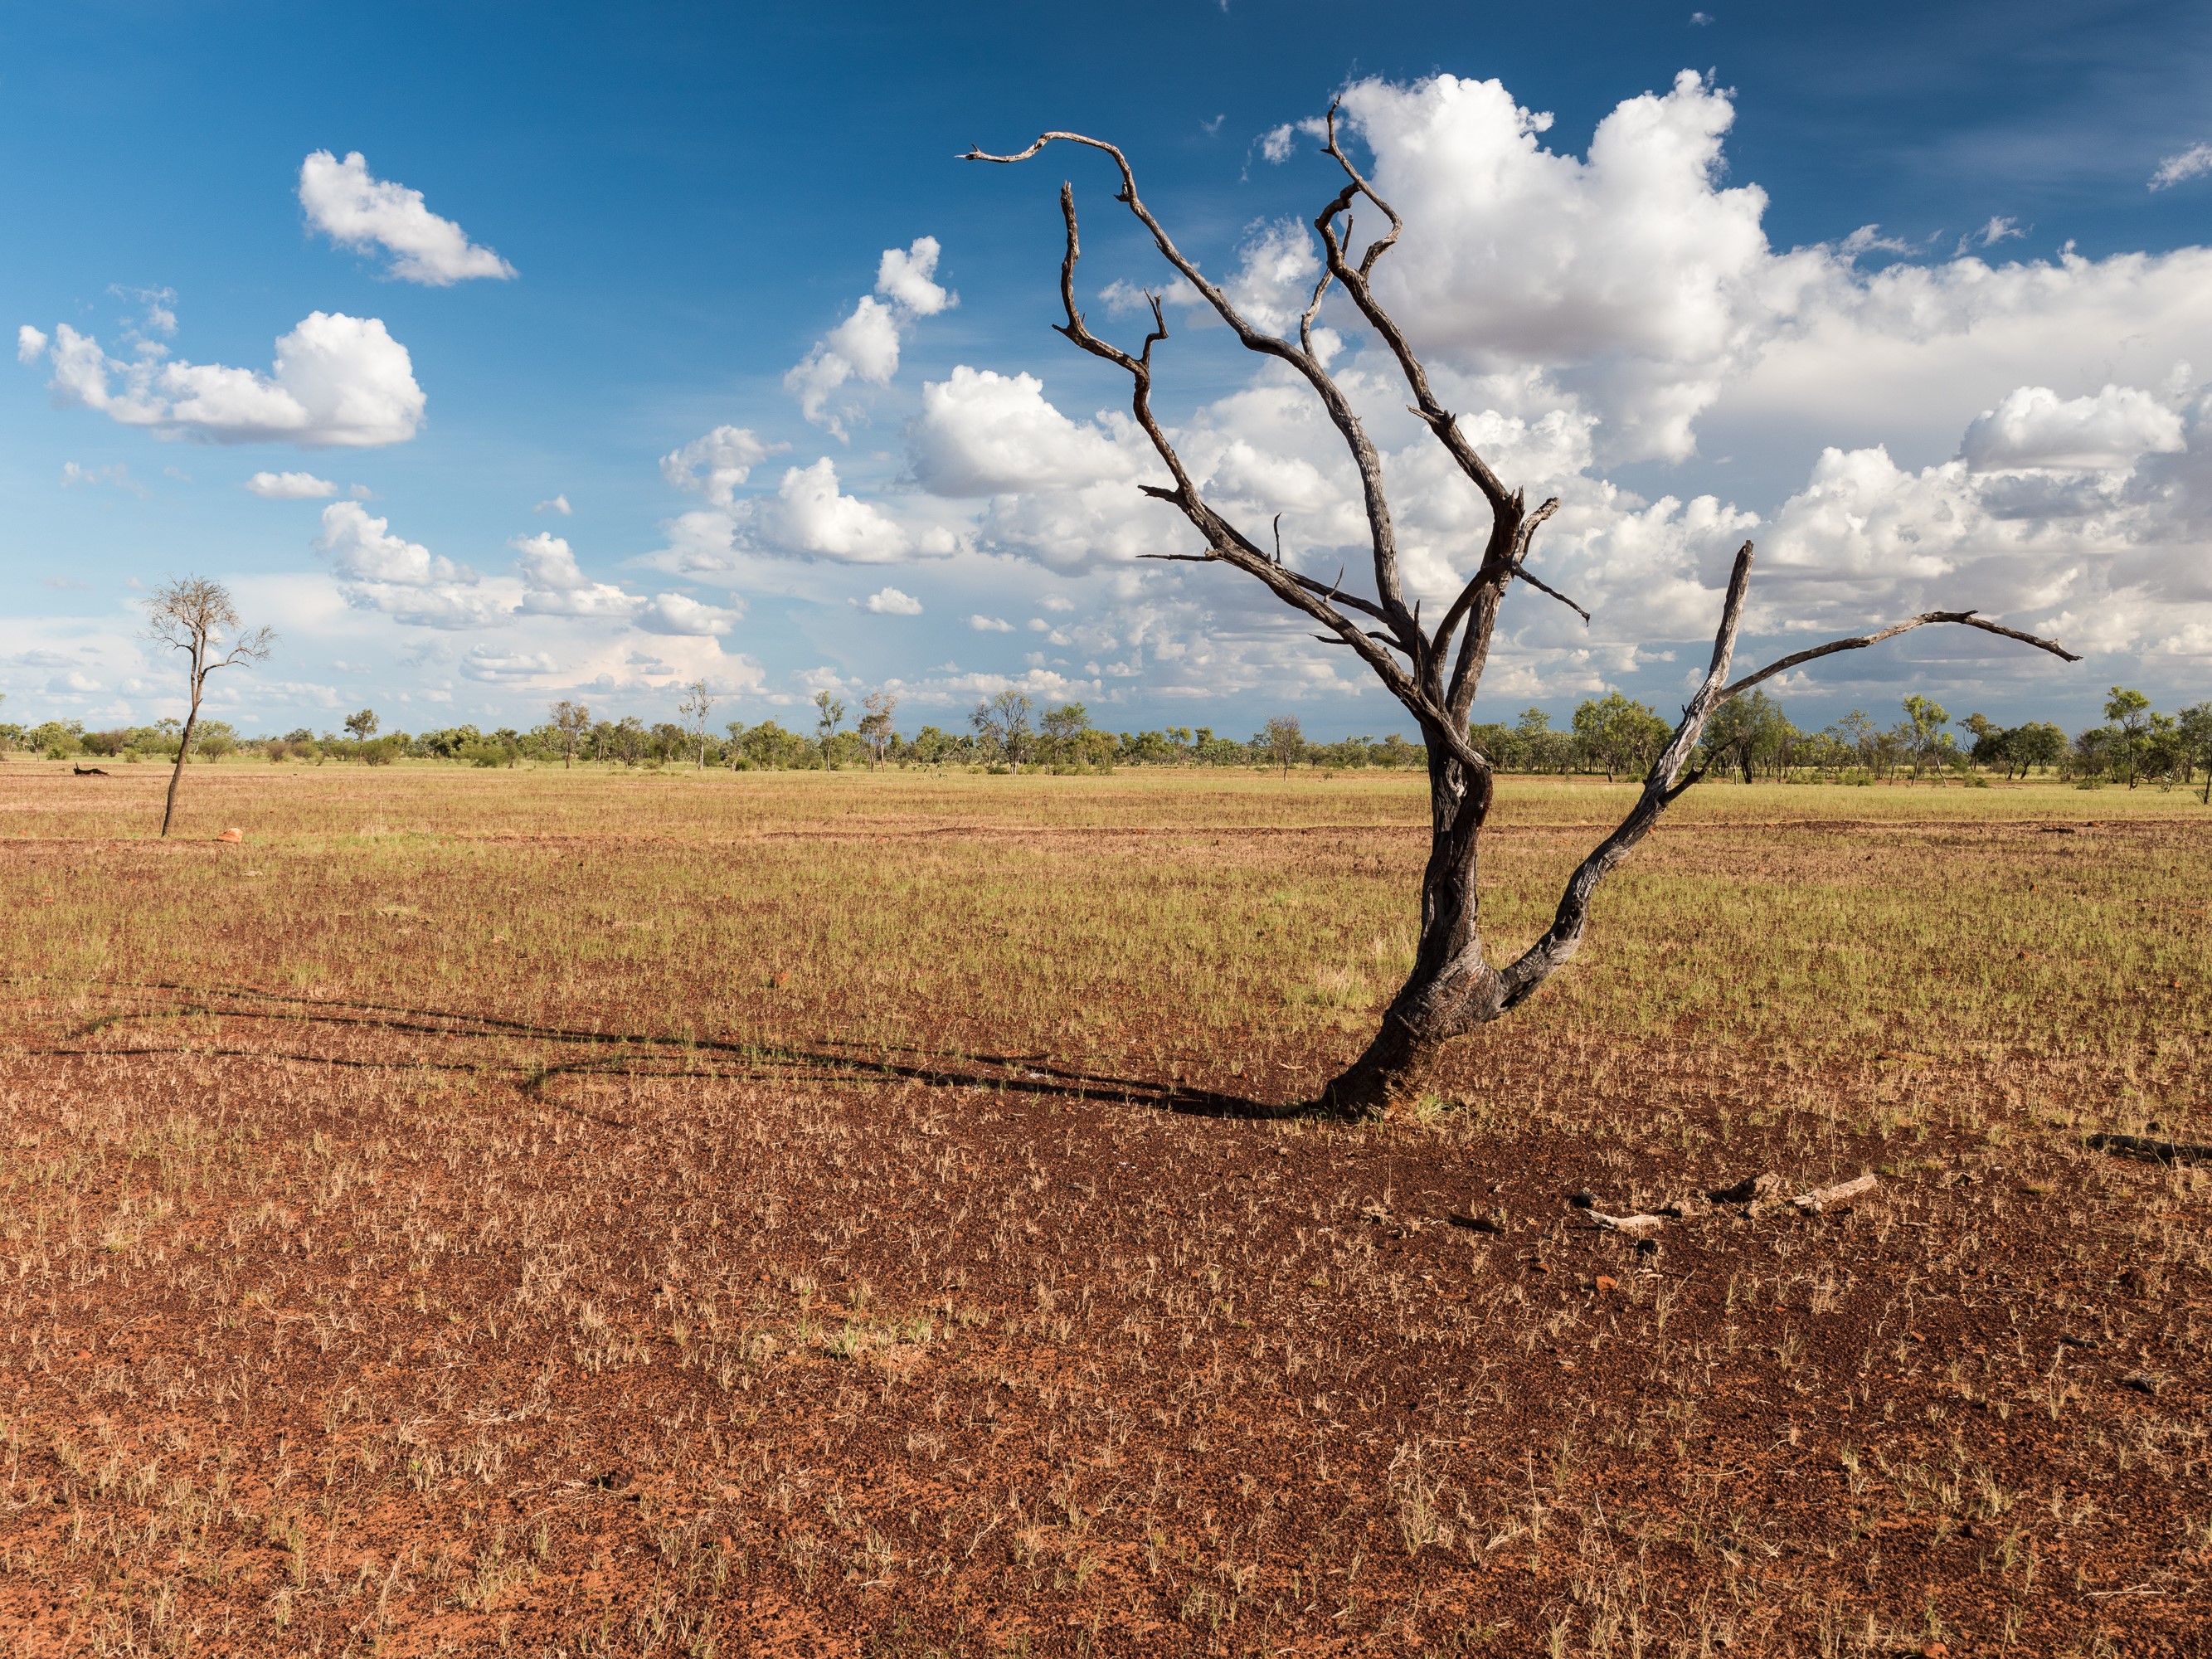 A new research and innovation hub, based at Charles Darwin University and with nodes in Katherine, Alice Springs, Broome and Perth, will help Northern Australia's producers and communities prepare for and respond to drought.